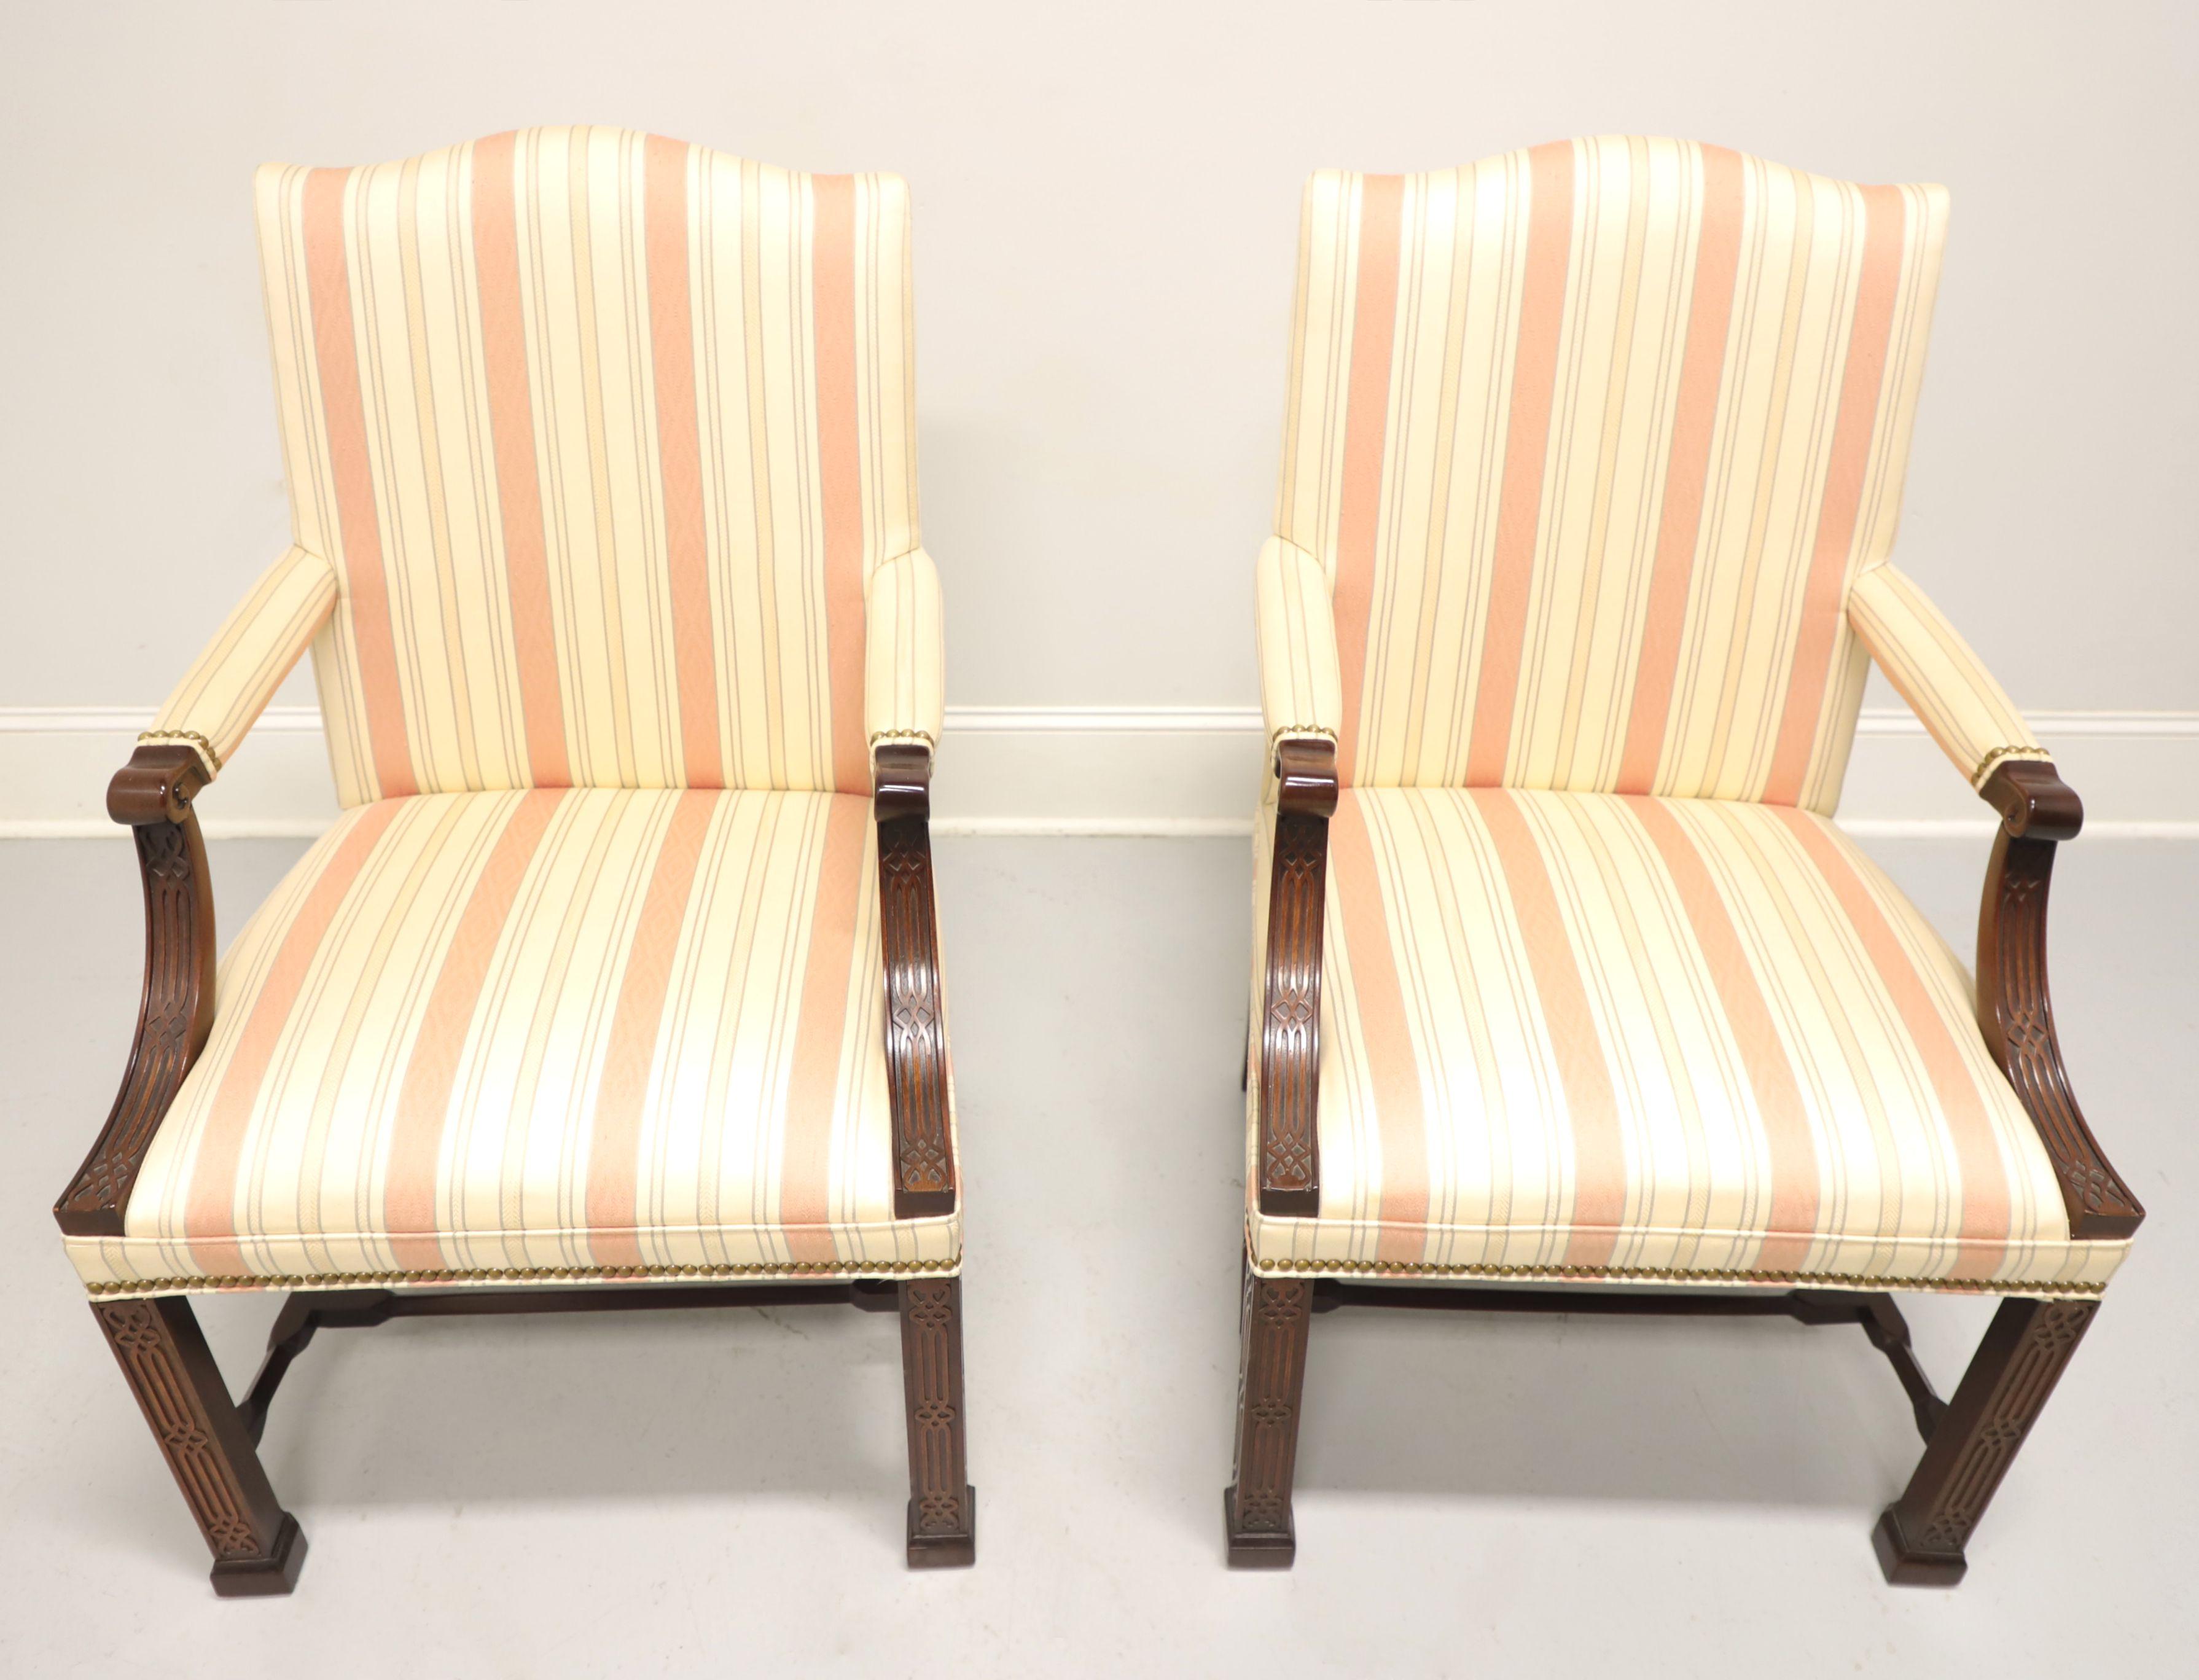 A pair of Chippendale style upholstered armchairs by Hickory Chair, their Wentworth. Mahogany frame, a neutral soft pink & beige color striped pattern fabric upholstery, upholstered arms with fretwork carved mahogany supports, brass nailhead trim,